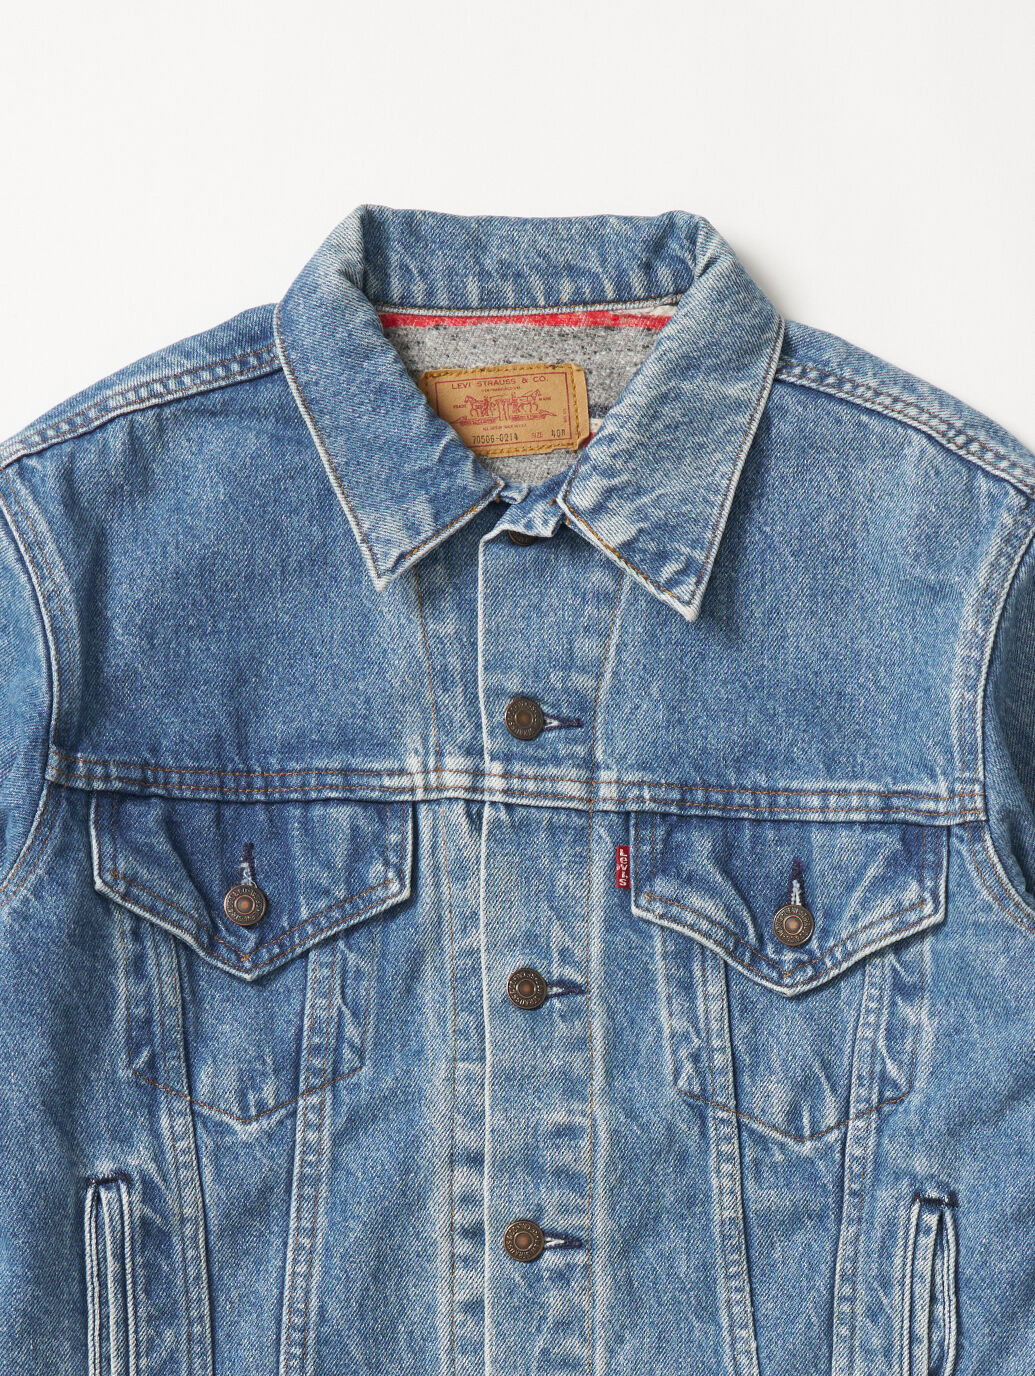 LEVI'S® AUTHORIZED VINTAGE MADE IN THE USA フランネルトラッカー ...